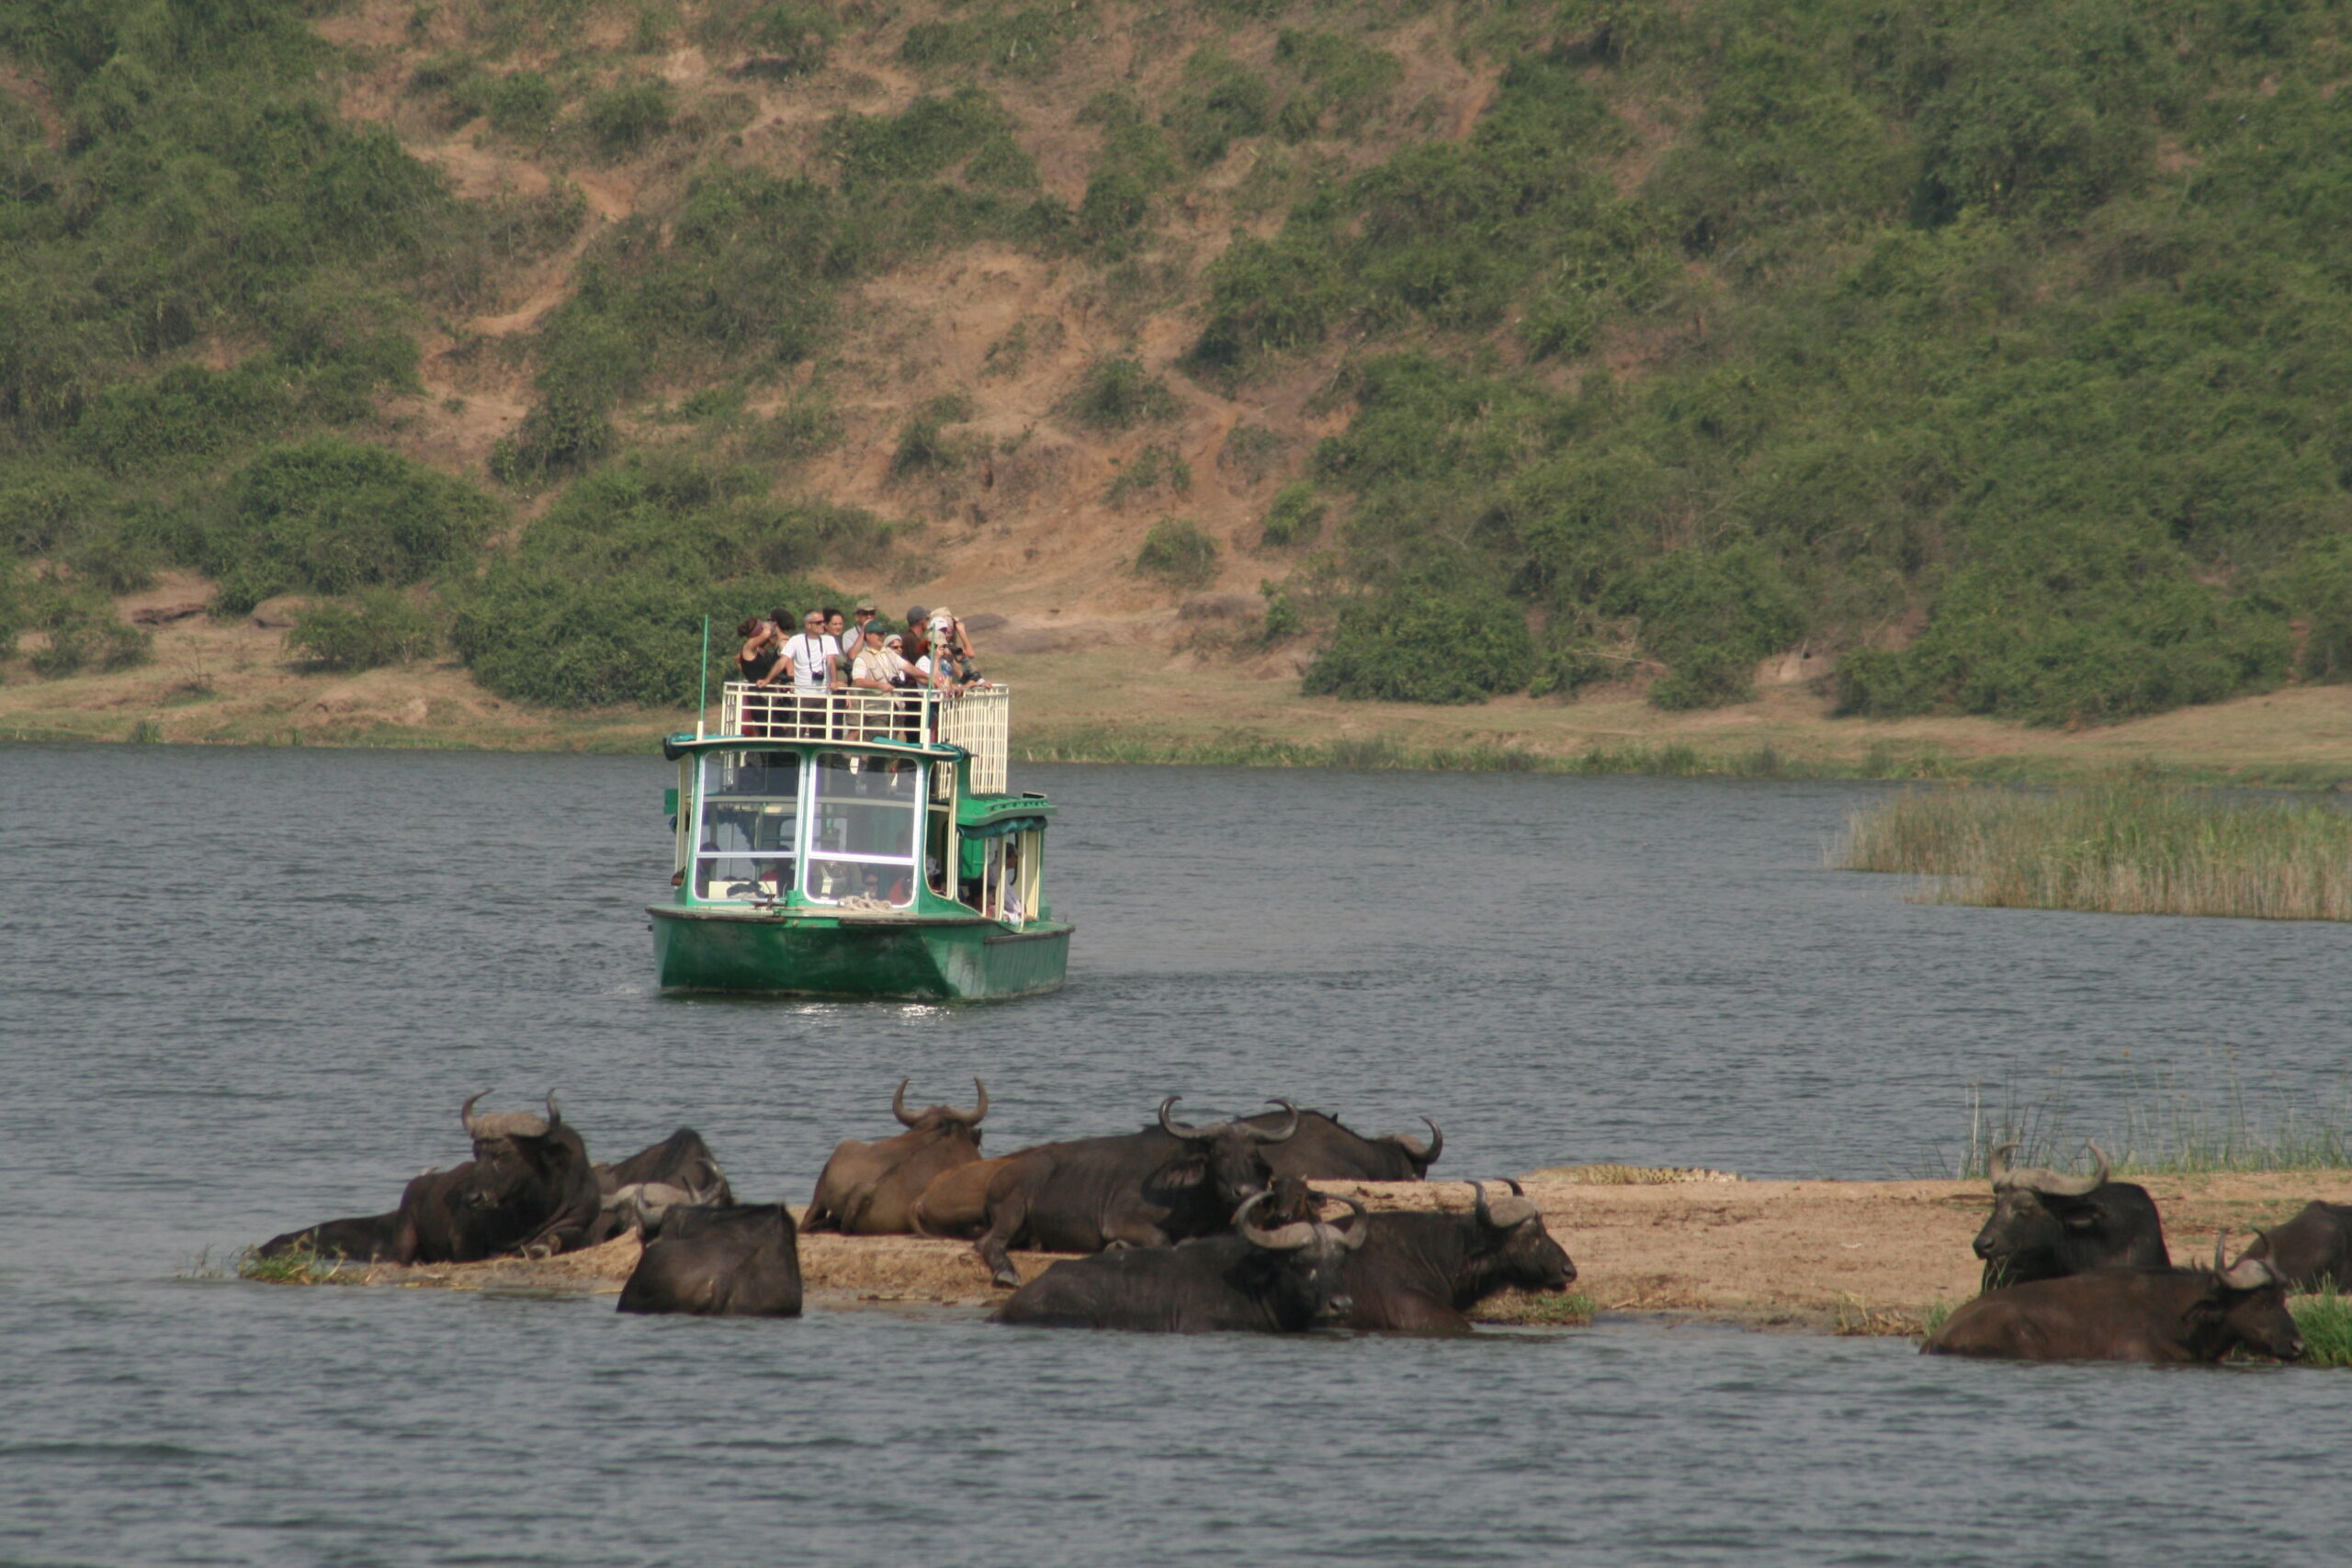 Adventure Along the Kazinga Channel in Uganda is among Queen Elizabeth National Park's most stunning natural features